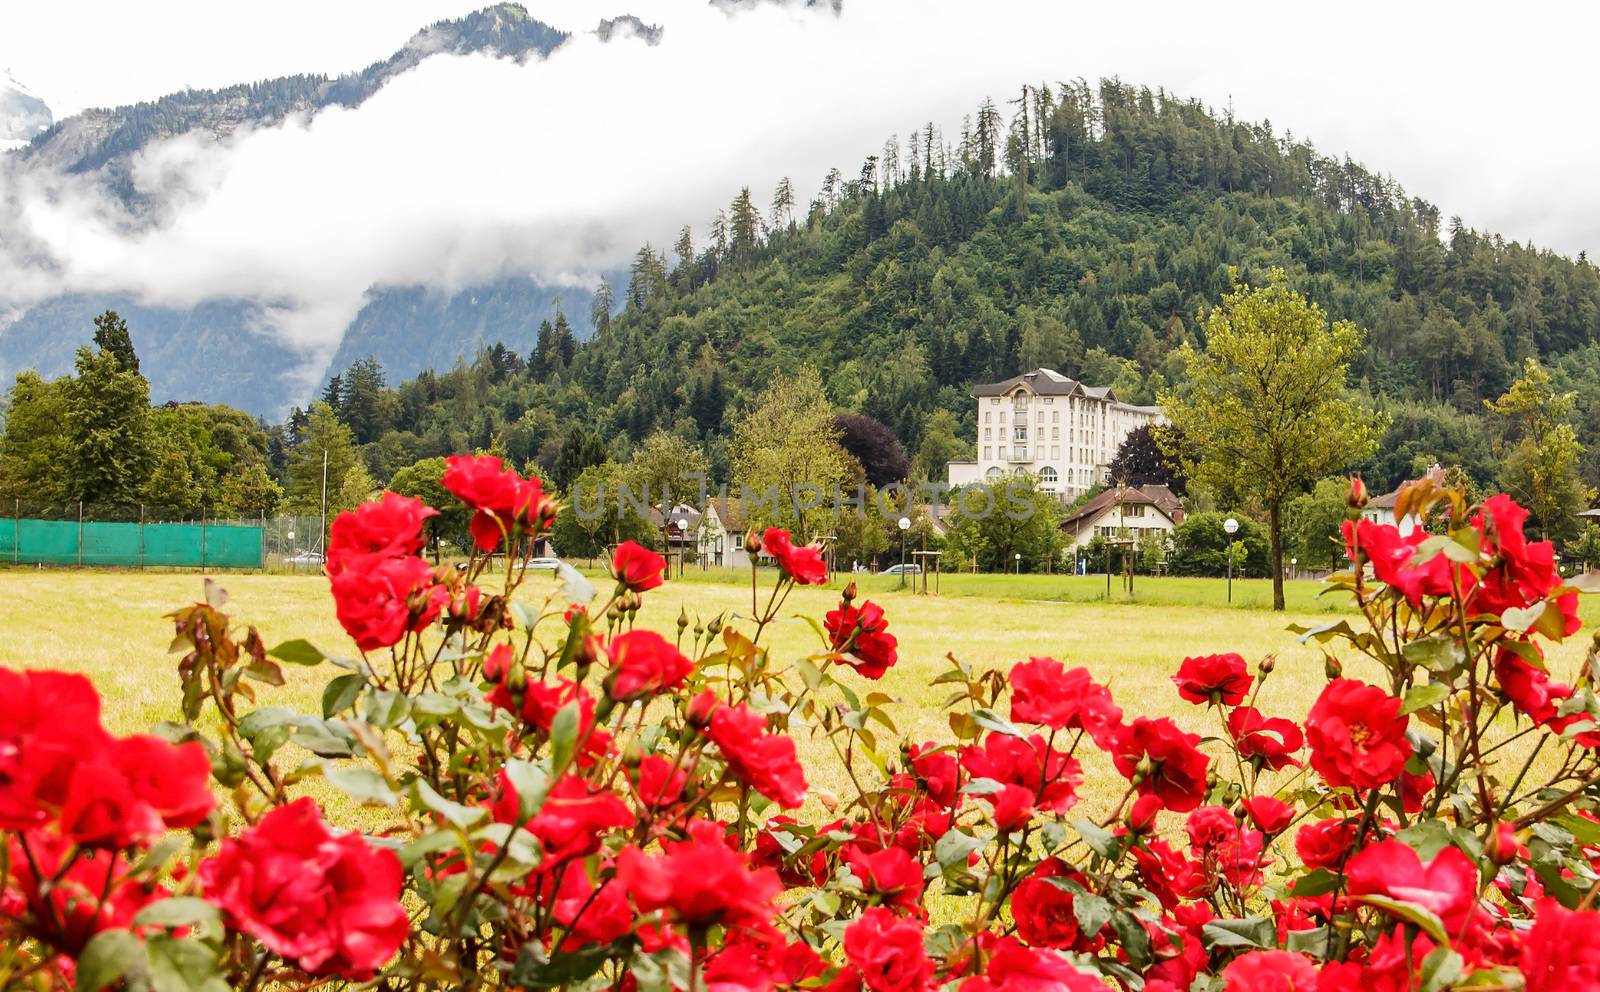 A rose garden in an open field in Interlaken with a view of hotel, house and mountains covered by clouds as a background by victorflowerfly